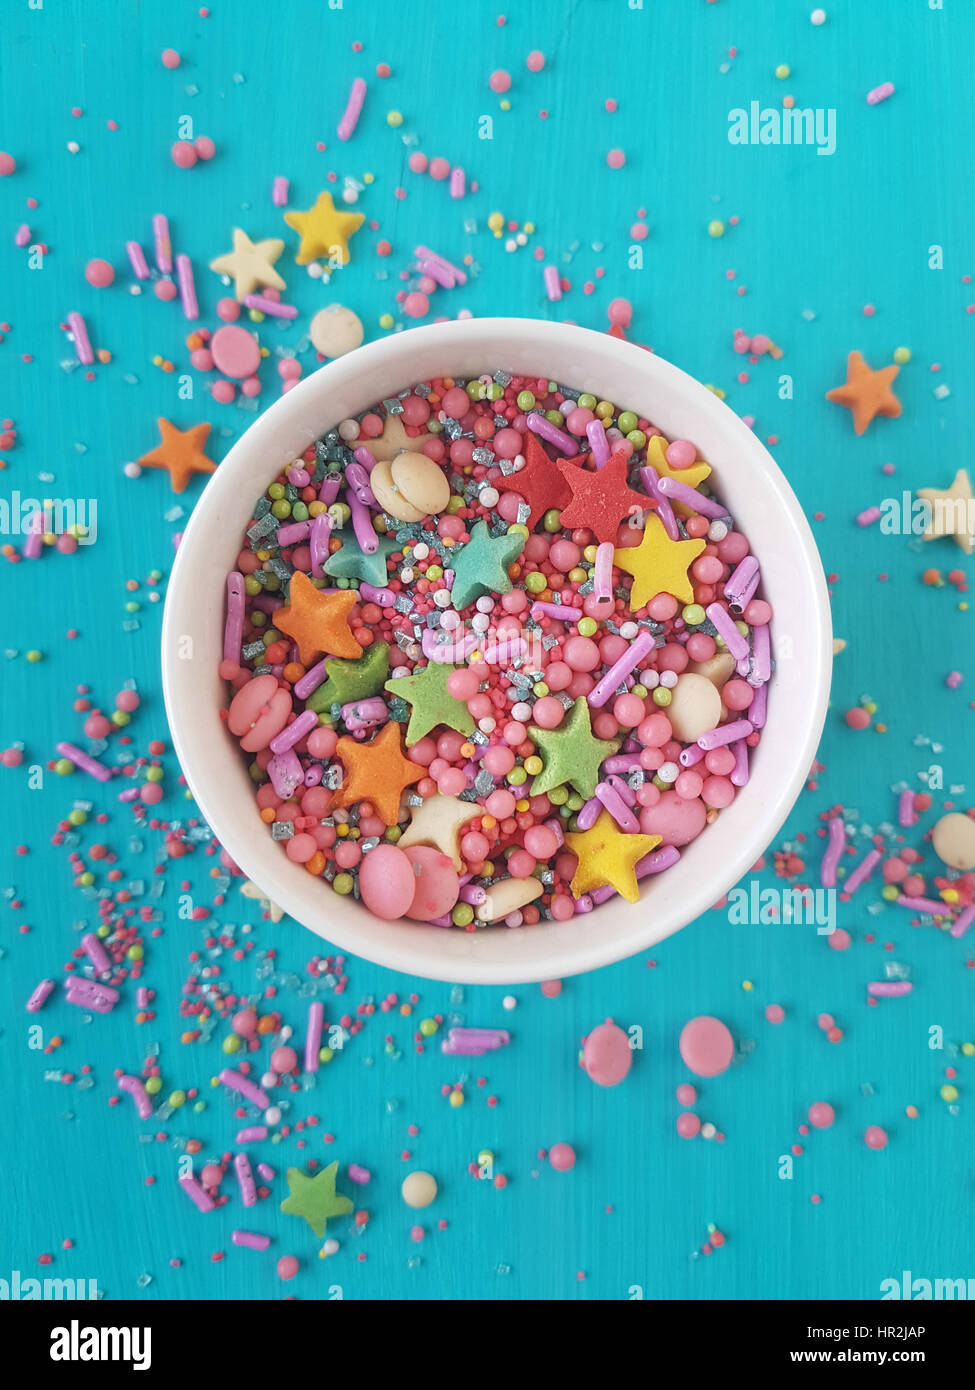 Metallic Golden Sugar Rods Sugar Beads Nonpareils Mix Wholesale Price Color  Sugar Ball Sprinkles Candy for Cake Decorations  China Food Coloring  Agents Food Colour  MadeinChinacom